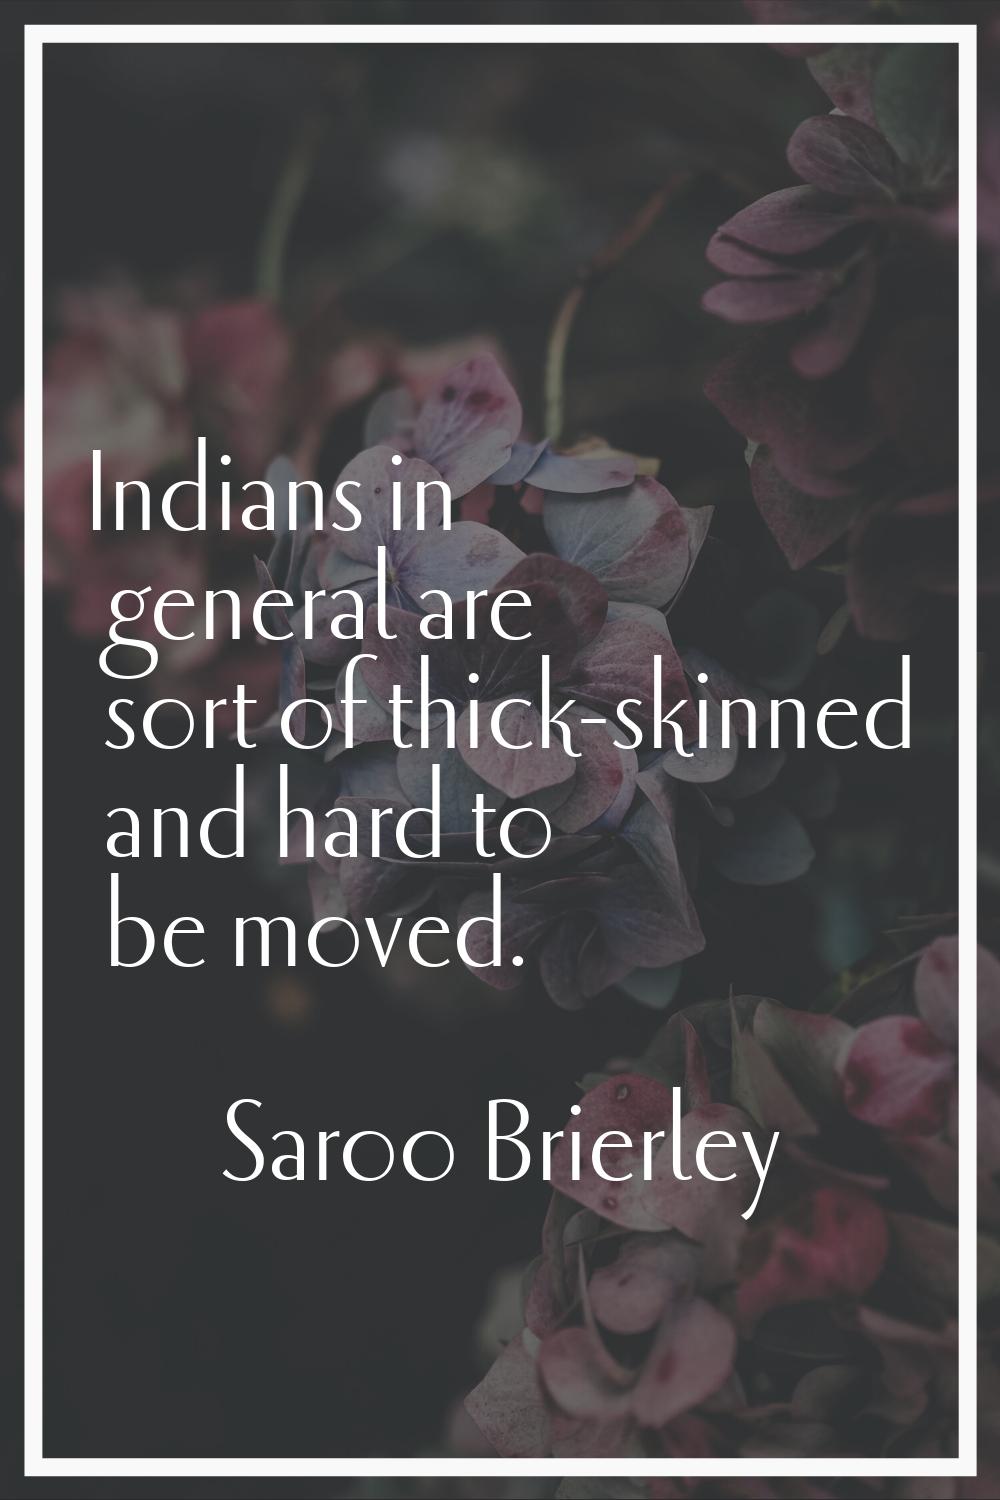 Indians in general are sort of thick-skinned and hard to be moved.